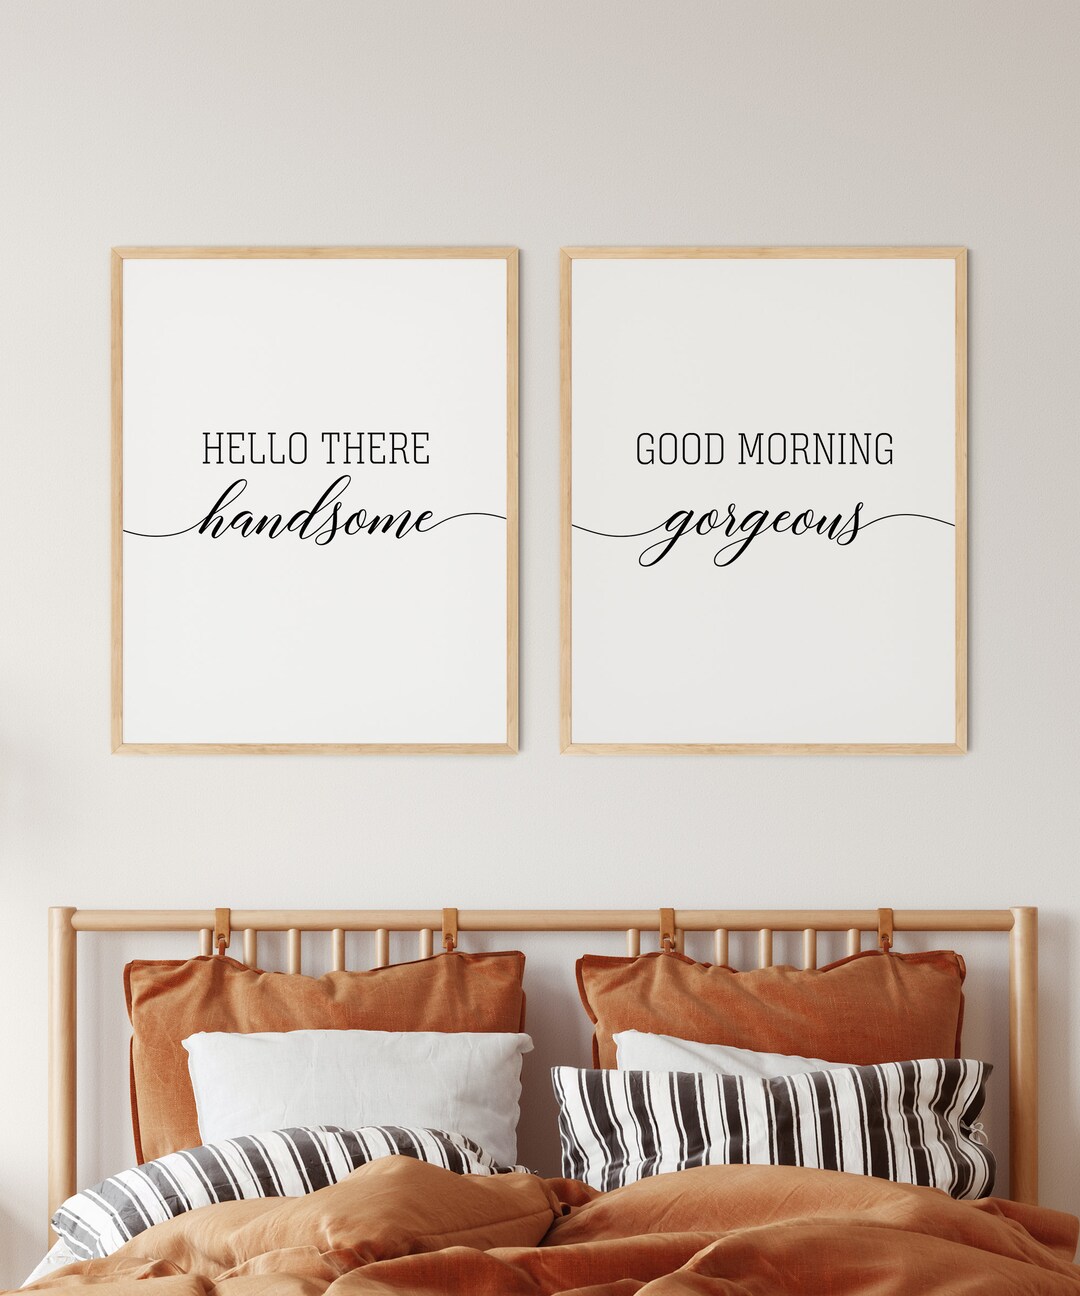 Hello There Handsome Good Morning Gorgeous Set of 2 Prints - Etsy